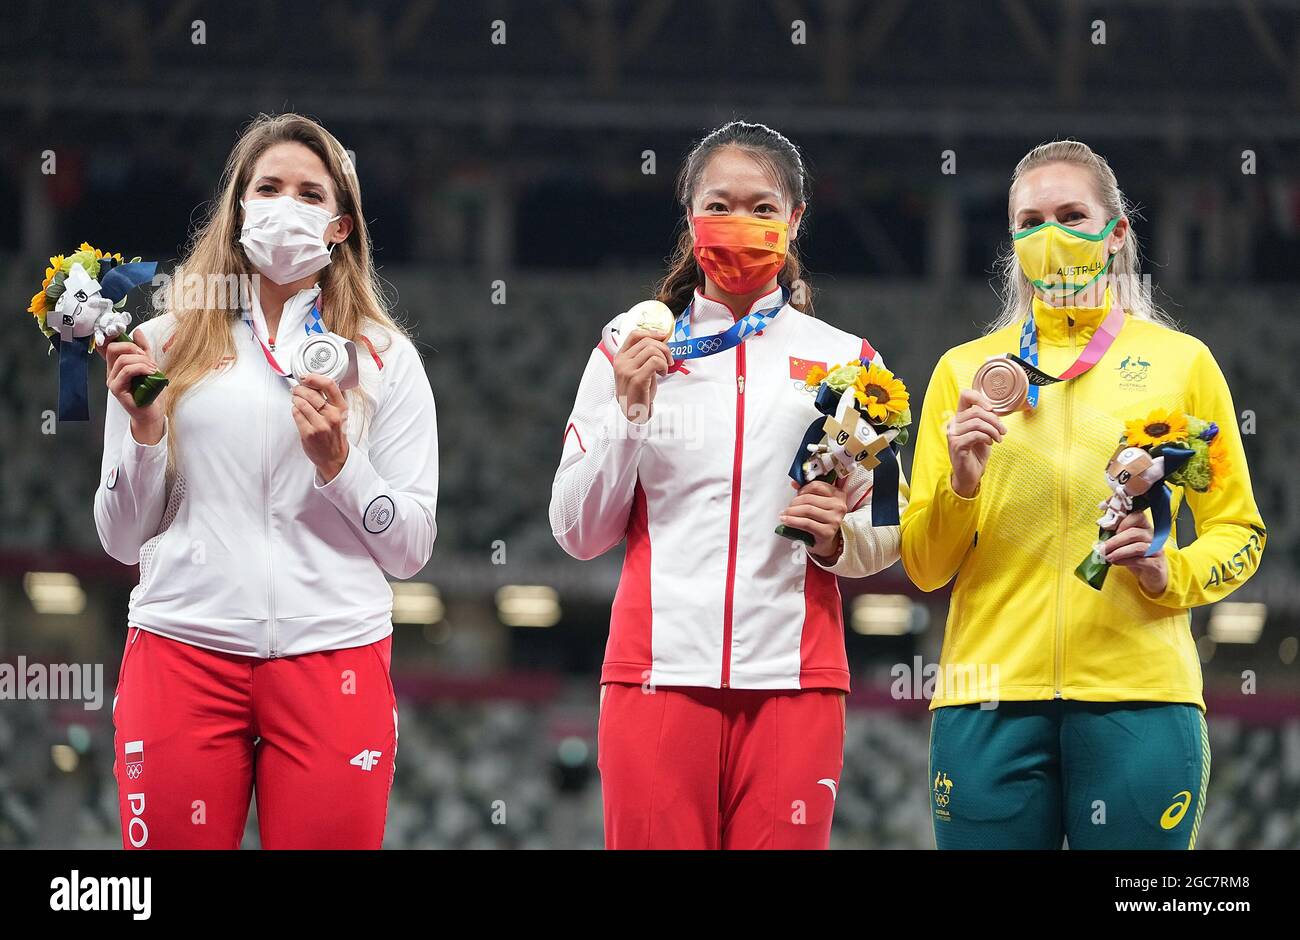 Tokyo, Japan. 7th Aug, 2021. Gold medalist Liu Shiying (C) of China, silver medalist Maria Andrejczyk (L) of Poland and bronze medalist Kelsey-Lee Barber of Australia react during the awarding ceremony of the Women's Javelin Throw at the Tokyo 2020 Olympic Games in Tokyo, Japan, Aug. 7, 2021. Credit: Lui Siu Wai/Xinhua/Alamy Live News Stock Photo